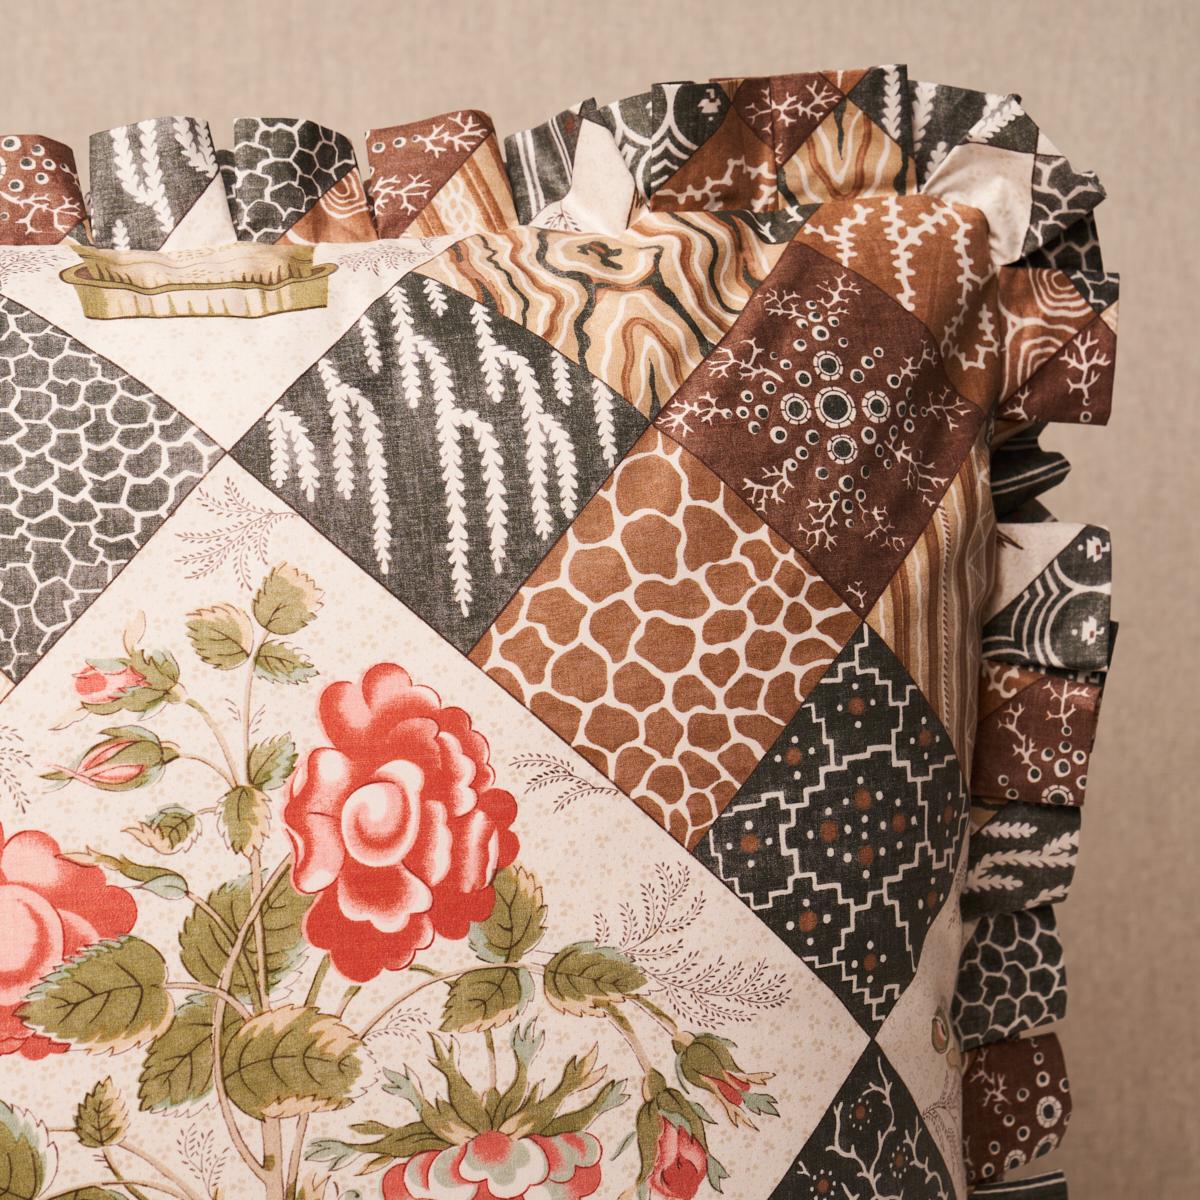 This pillow features Caldwell Patchwork Chintz with a fringe finish. Caldwell Patchwork Chintz in rose-and-chocolate is a trompe l'oeil quilted pattern where lovely floral bouquets are framed by an intricate and charming patchwork of graphic